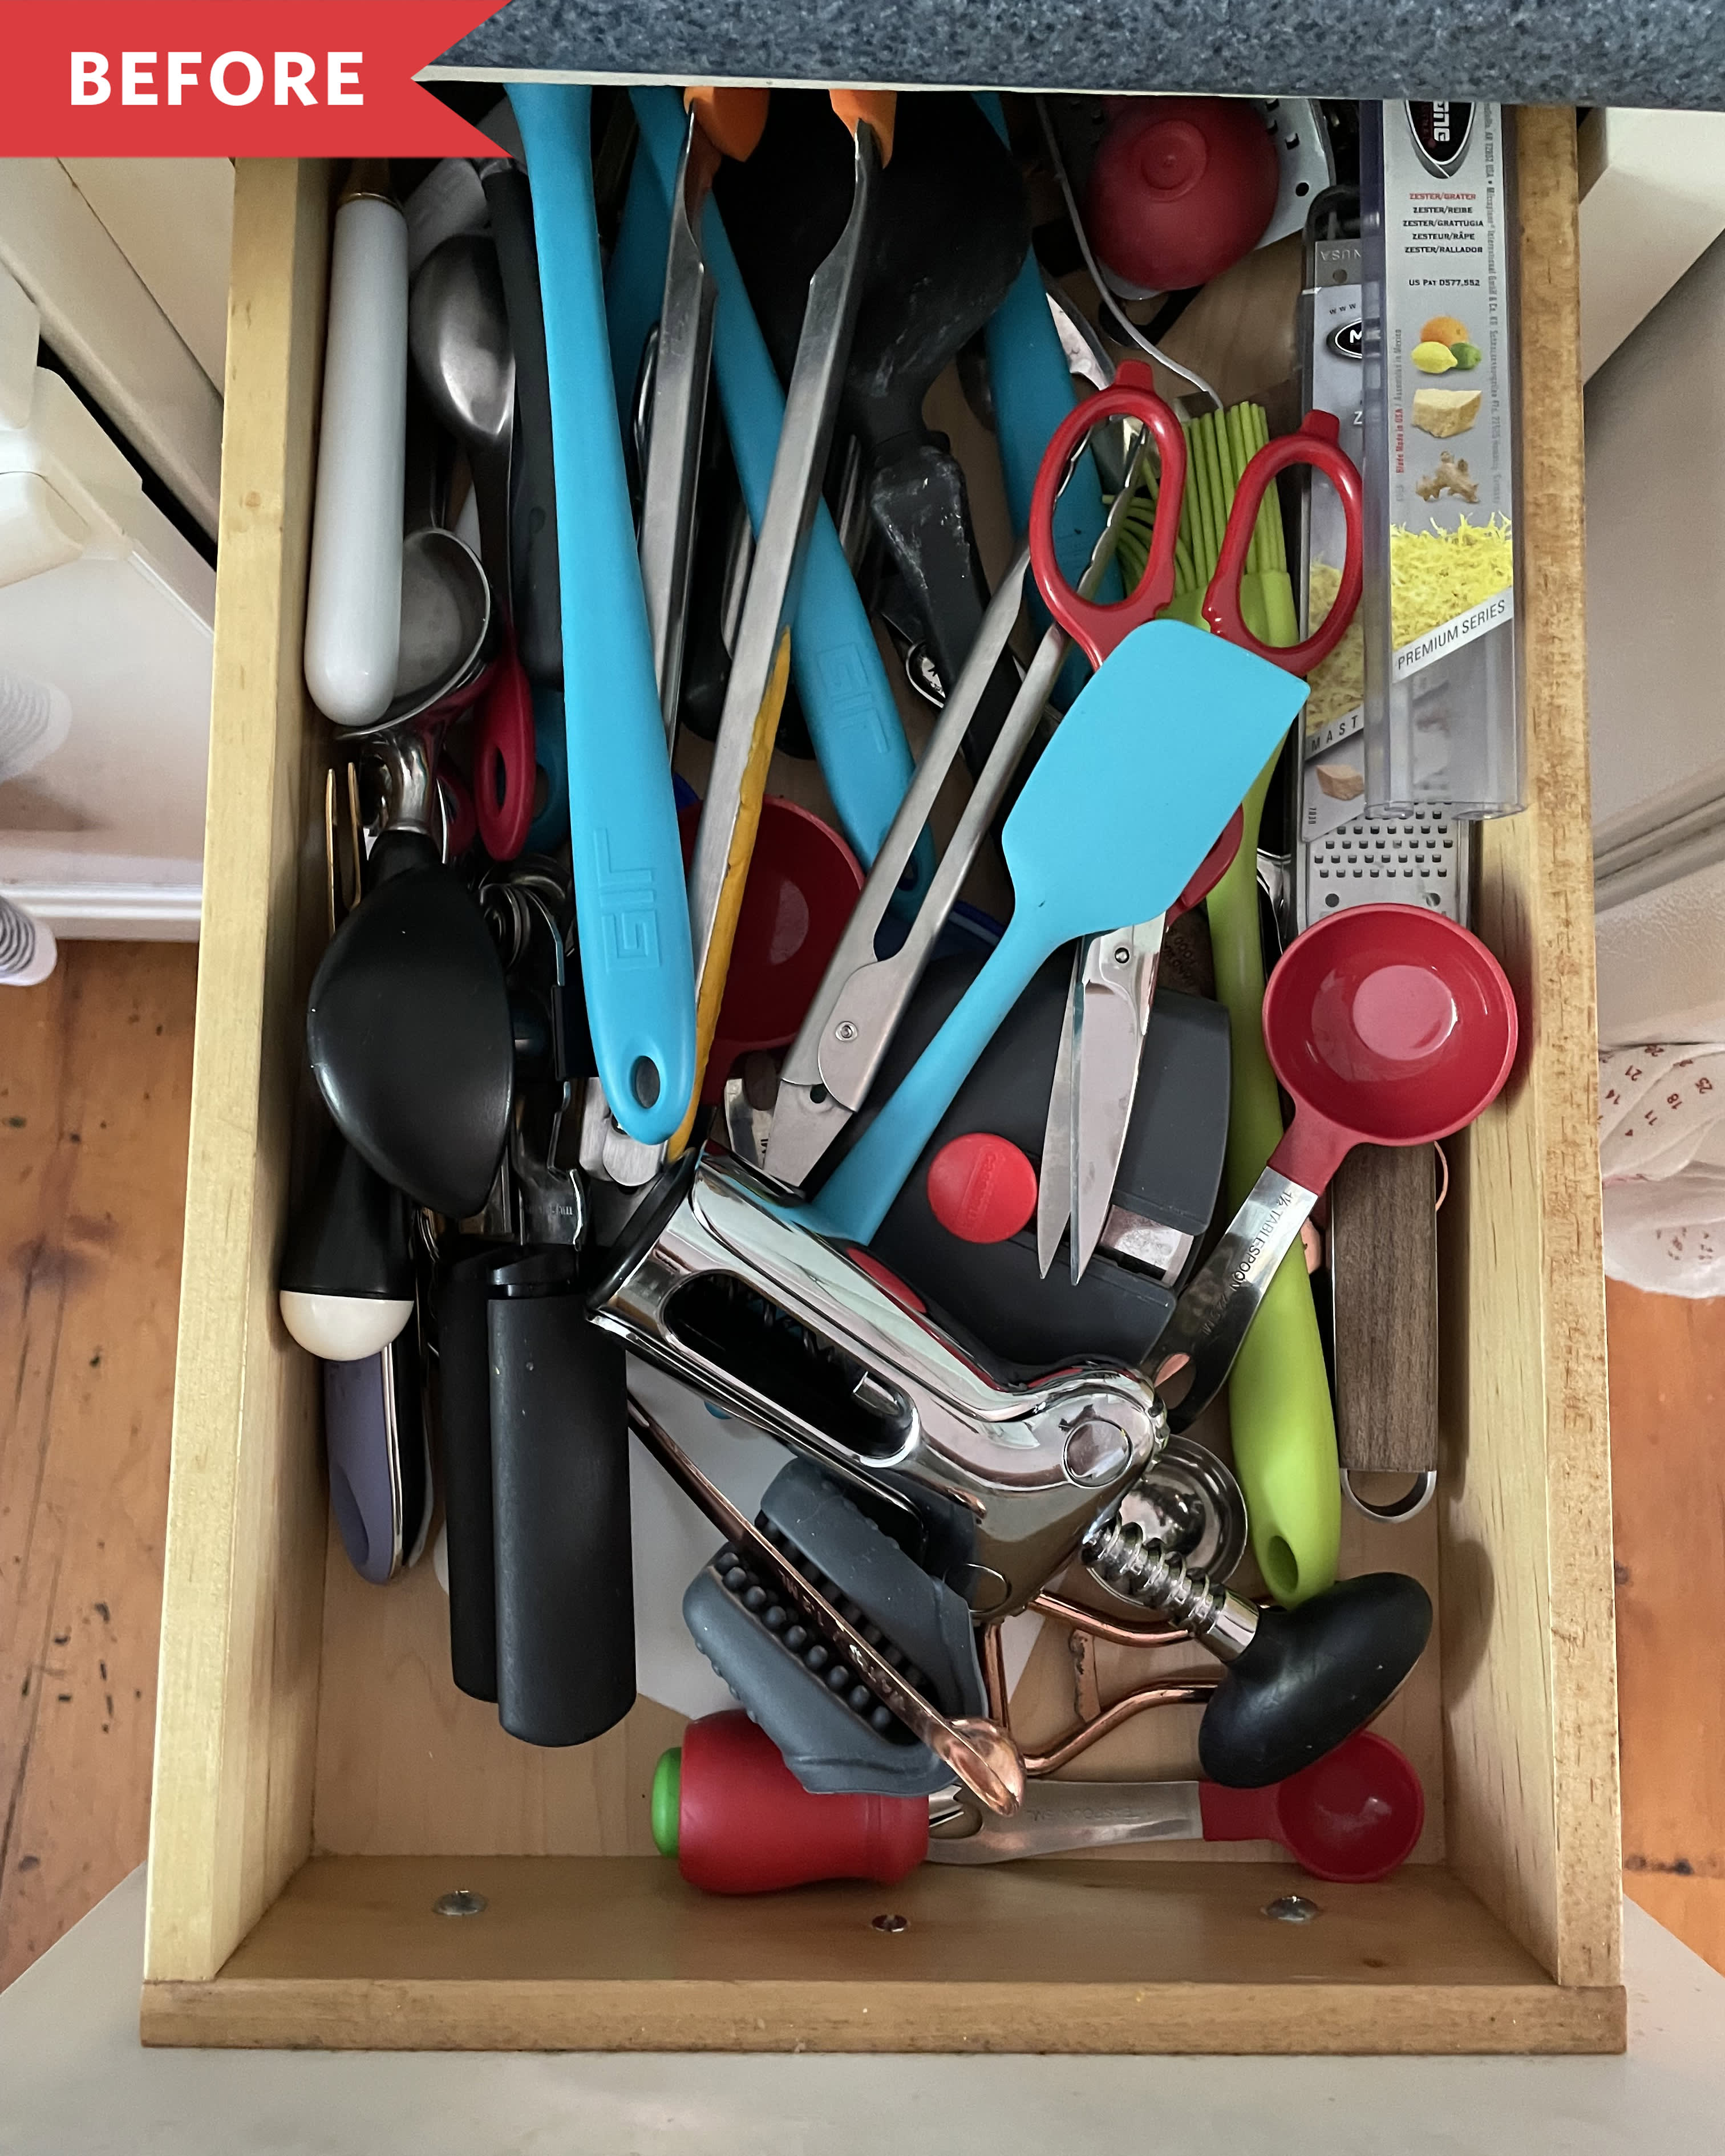 OXO Good Grips Lazy Susan Review 2022: an Ideal Cabinet Organizer